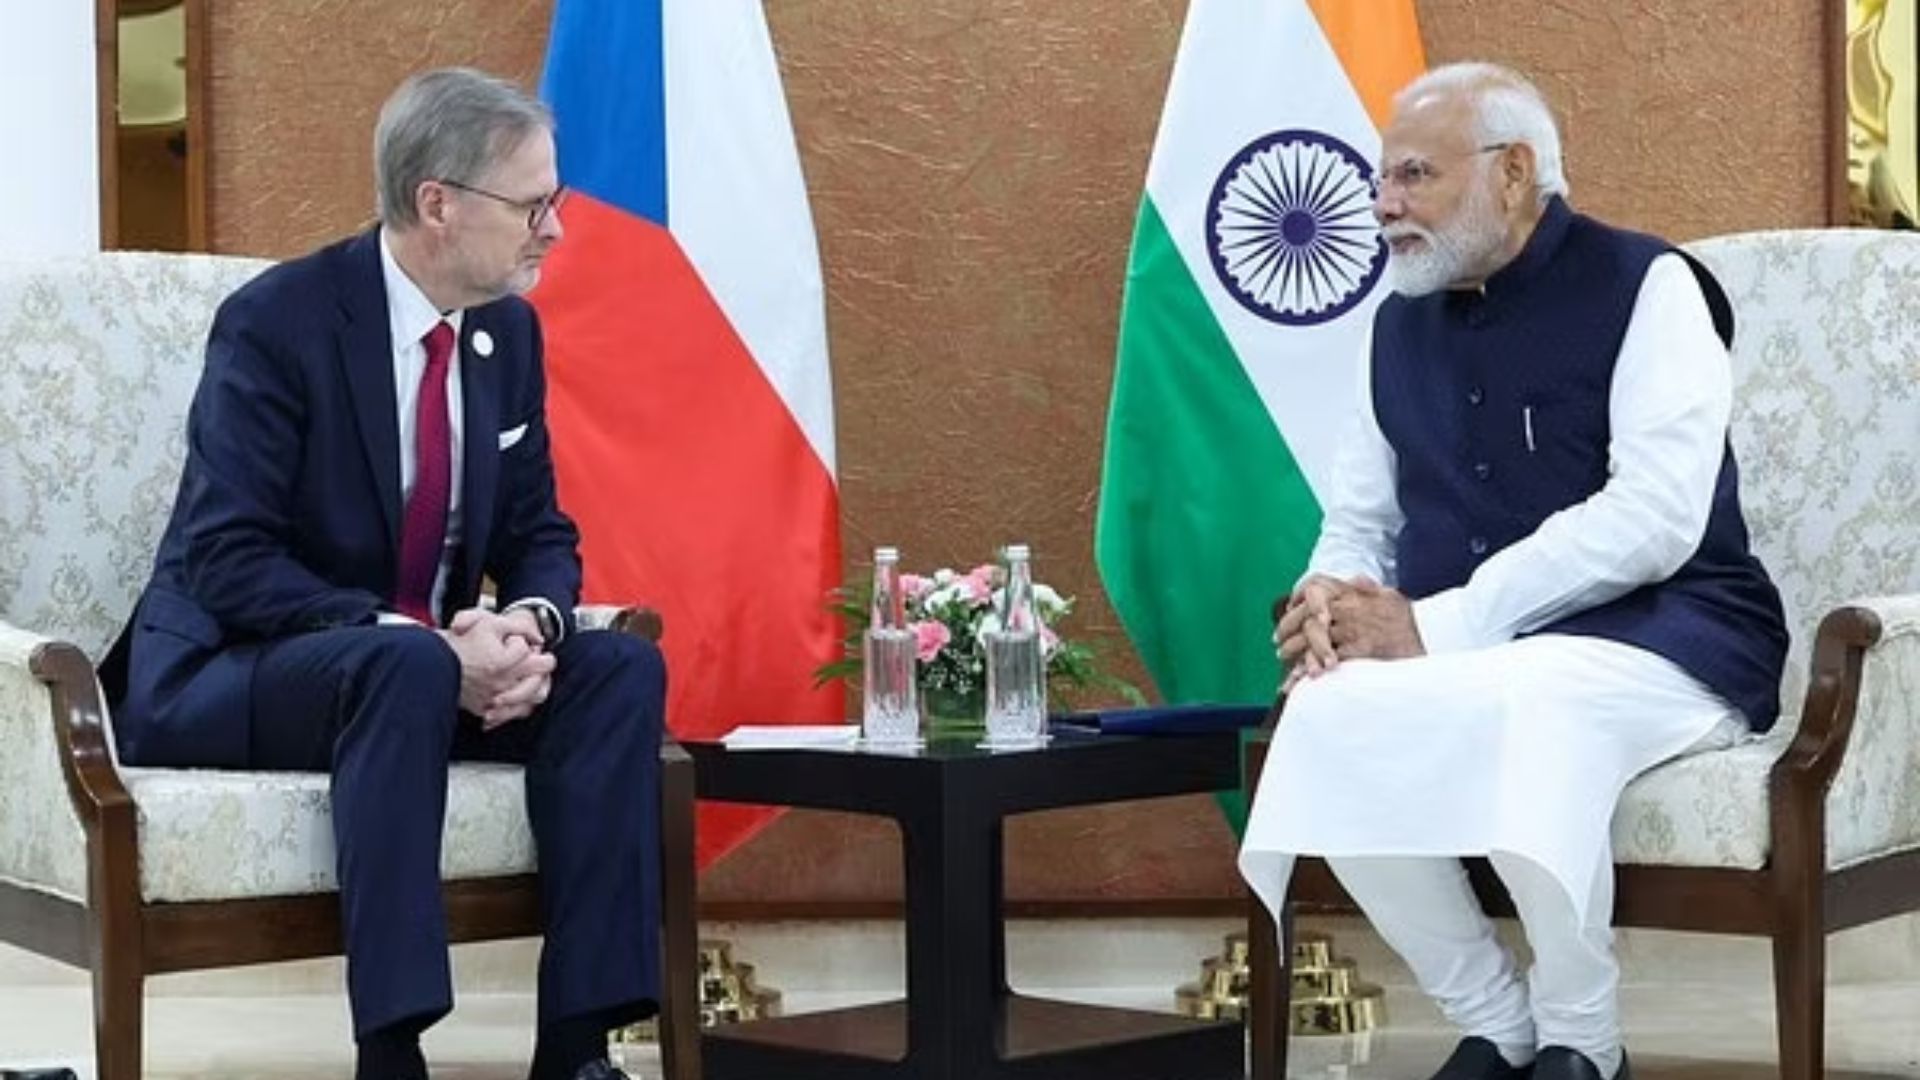 PM Modi holds bilateral meeting with Czech counterpart Petr Fiala in Gandhinagar